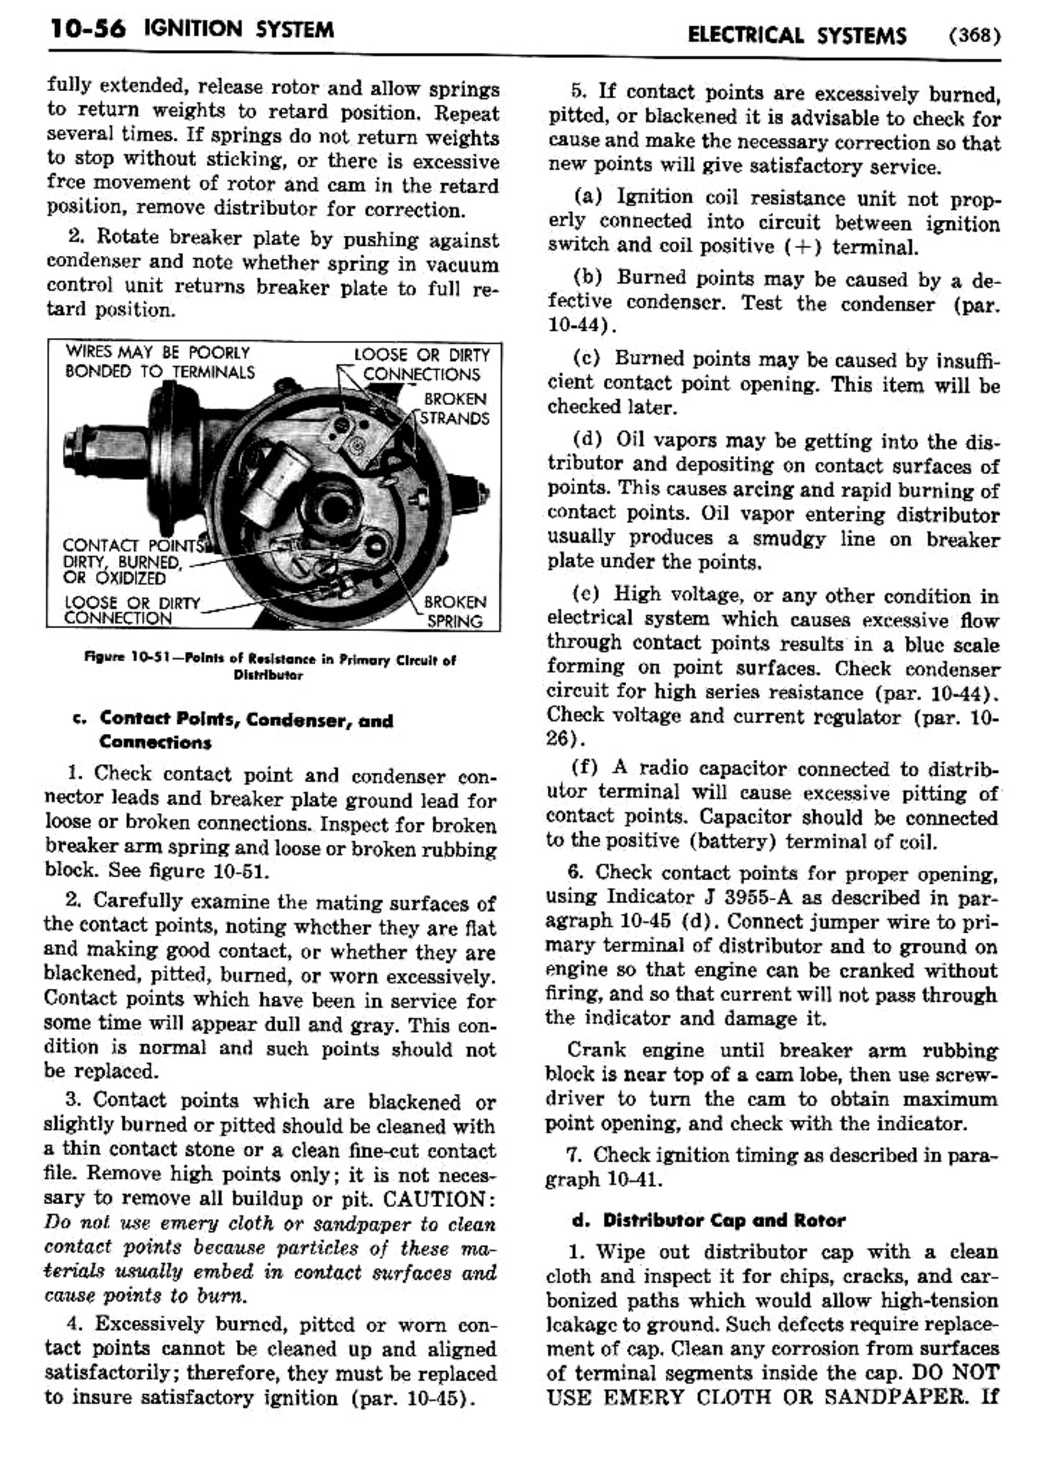 n_11 1954 Buick Shop Manual - Electrical Systems-056-056.jpg